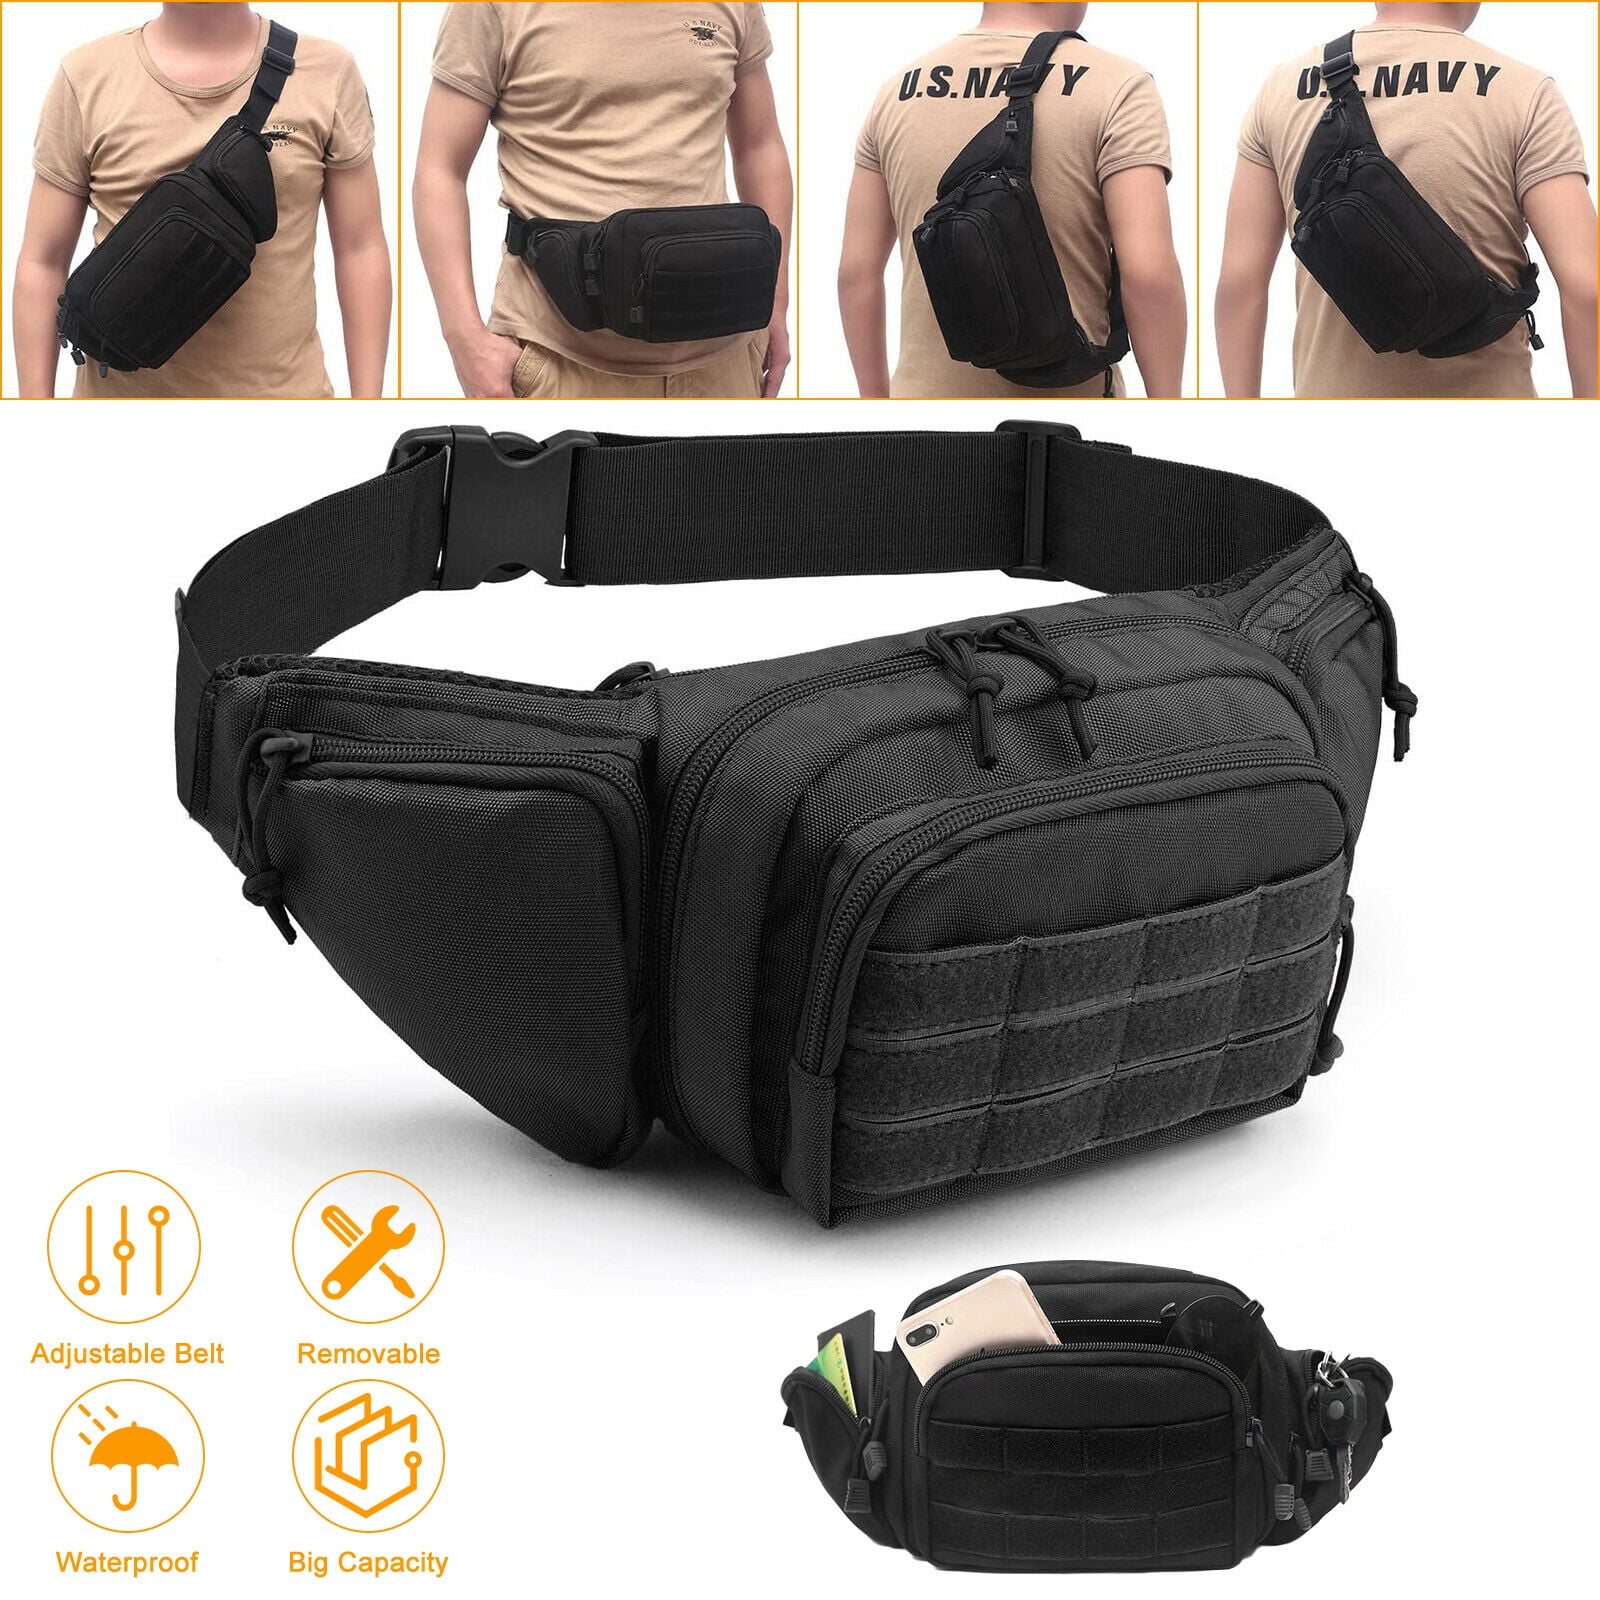 Tactical Fanny Pack Military Waist Bag Pack Hip Bum EDC Bag with Adjustable  Strap for Camping Hiking Hunting